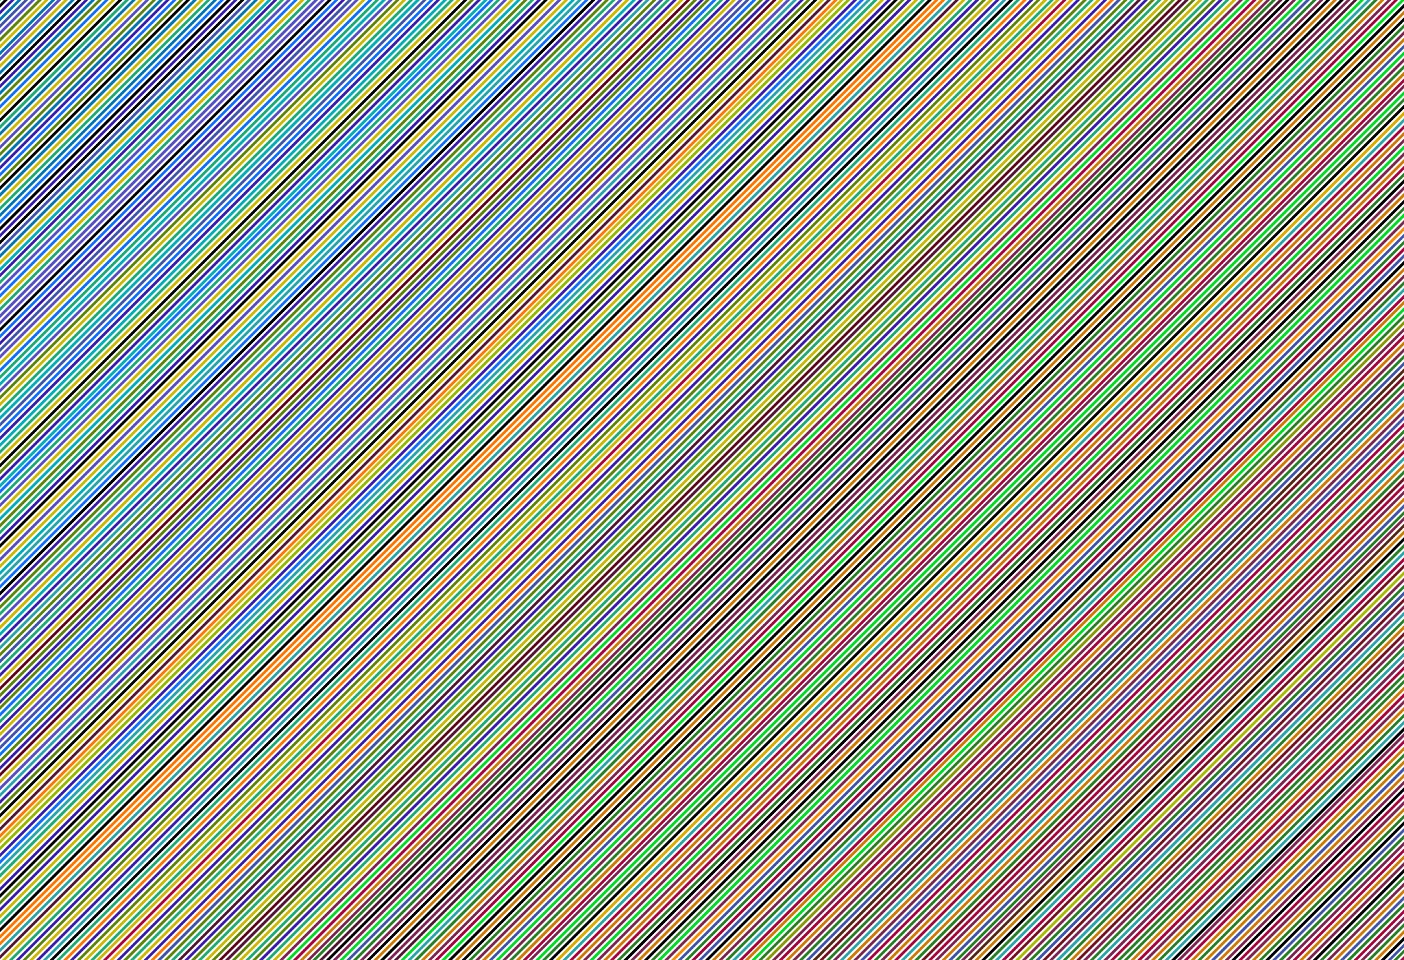 Dane Albert, Color Sticks #22, 2023
Acrylic on canvas (Concept), 48 x 72 in. (121.9 x 182.9 cm)
Series of colored lines and shapes in multiple configurations
DA.2023.sticks-022